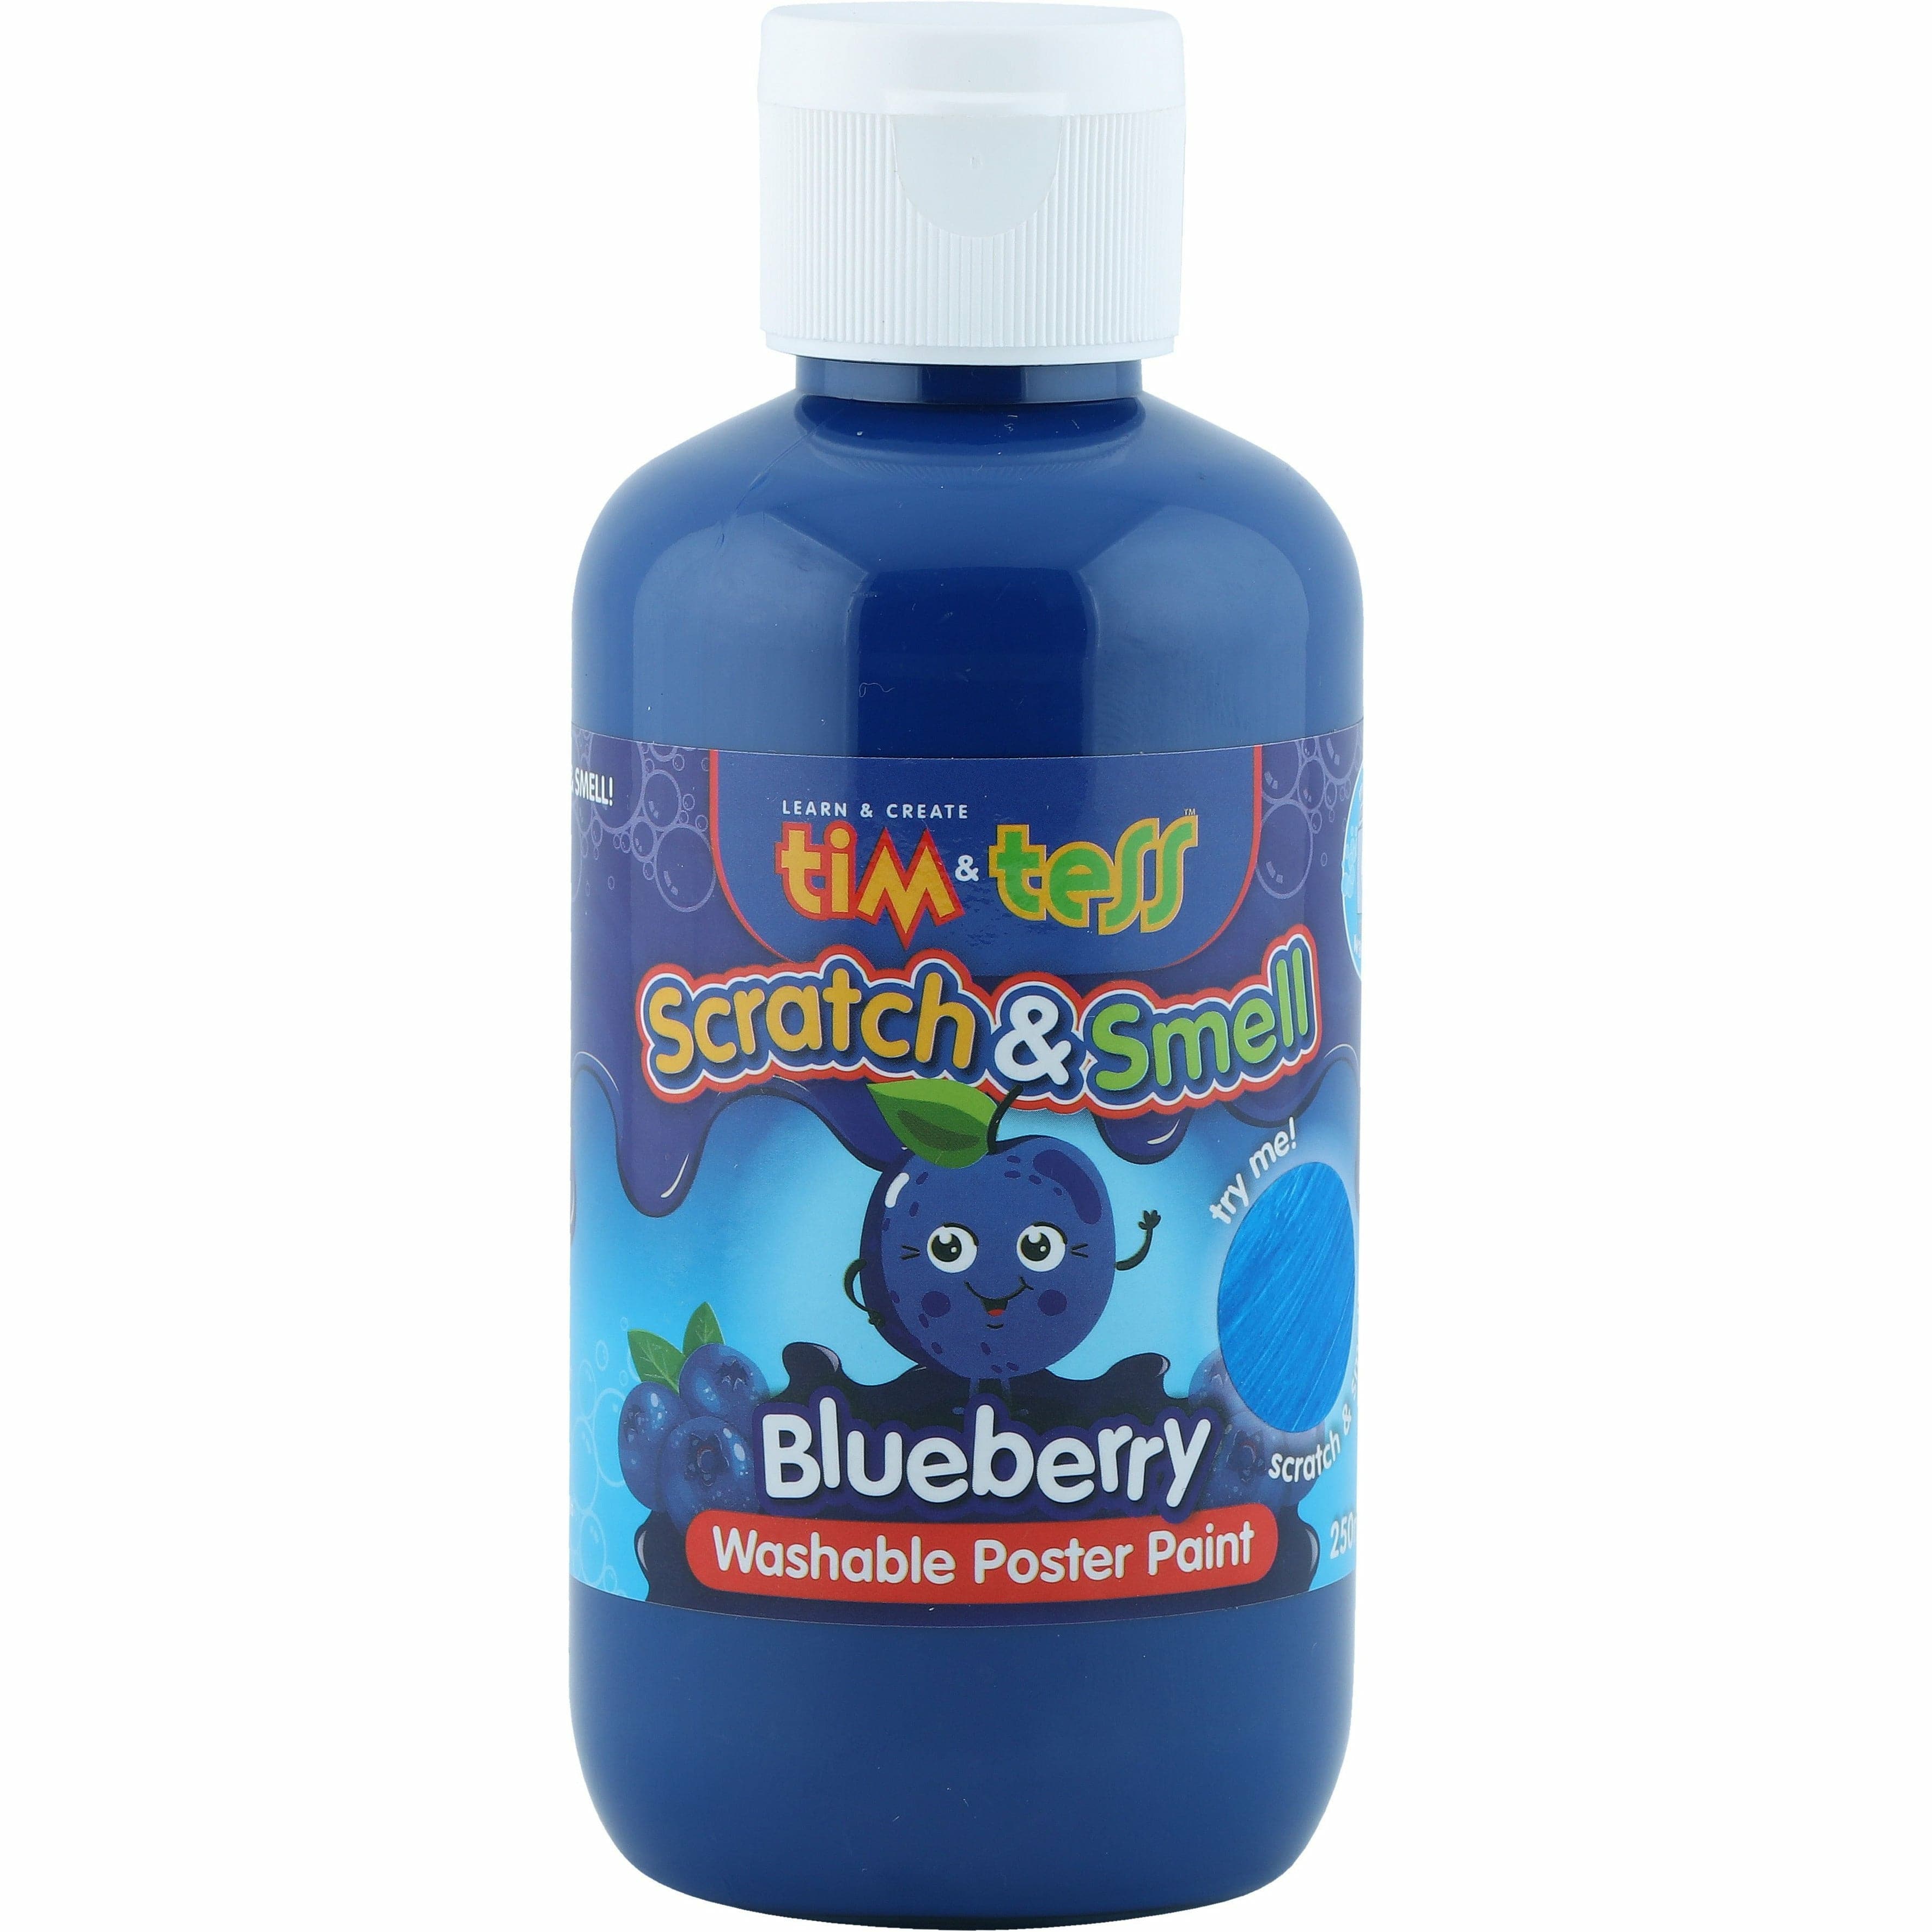 Image of Tim & Tess Scratch & Smell Children's Washable Poster Paint Blueberry 250ml